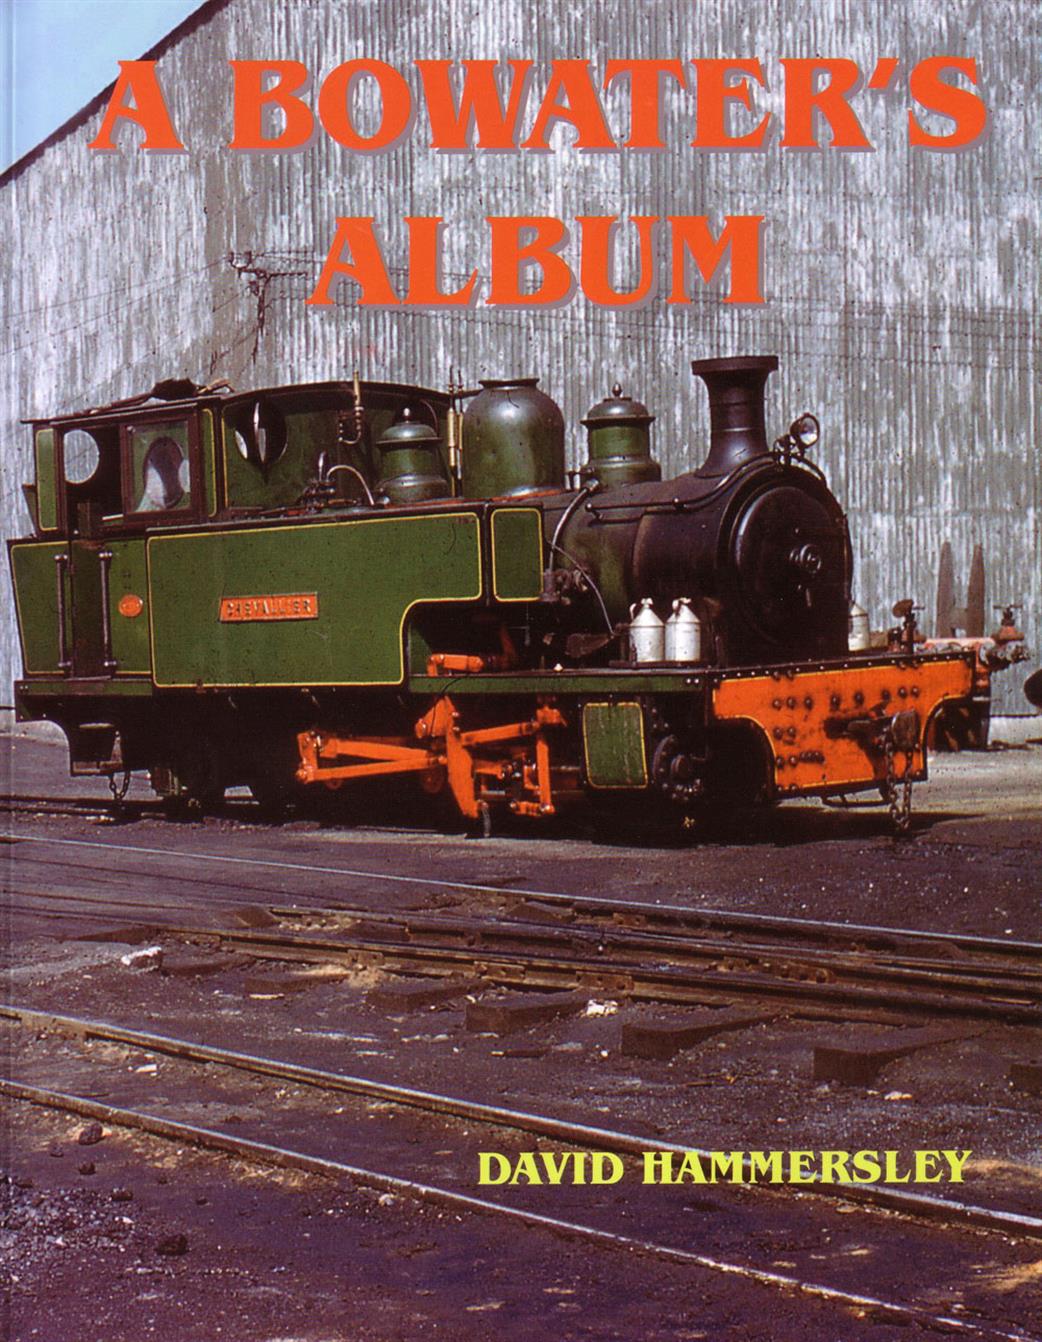 9781906419264 A Bowater's Album by David Hammersley